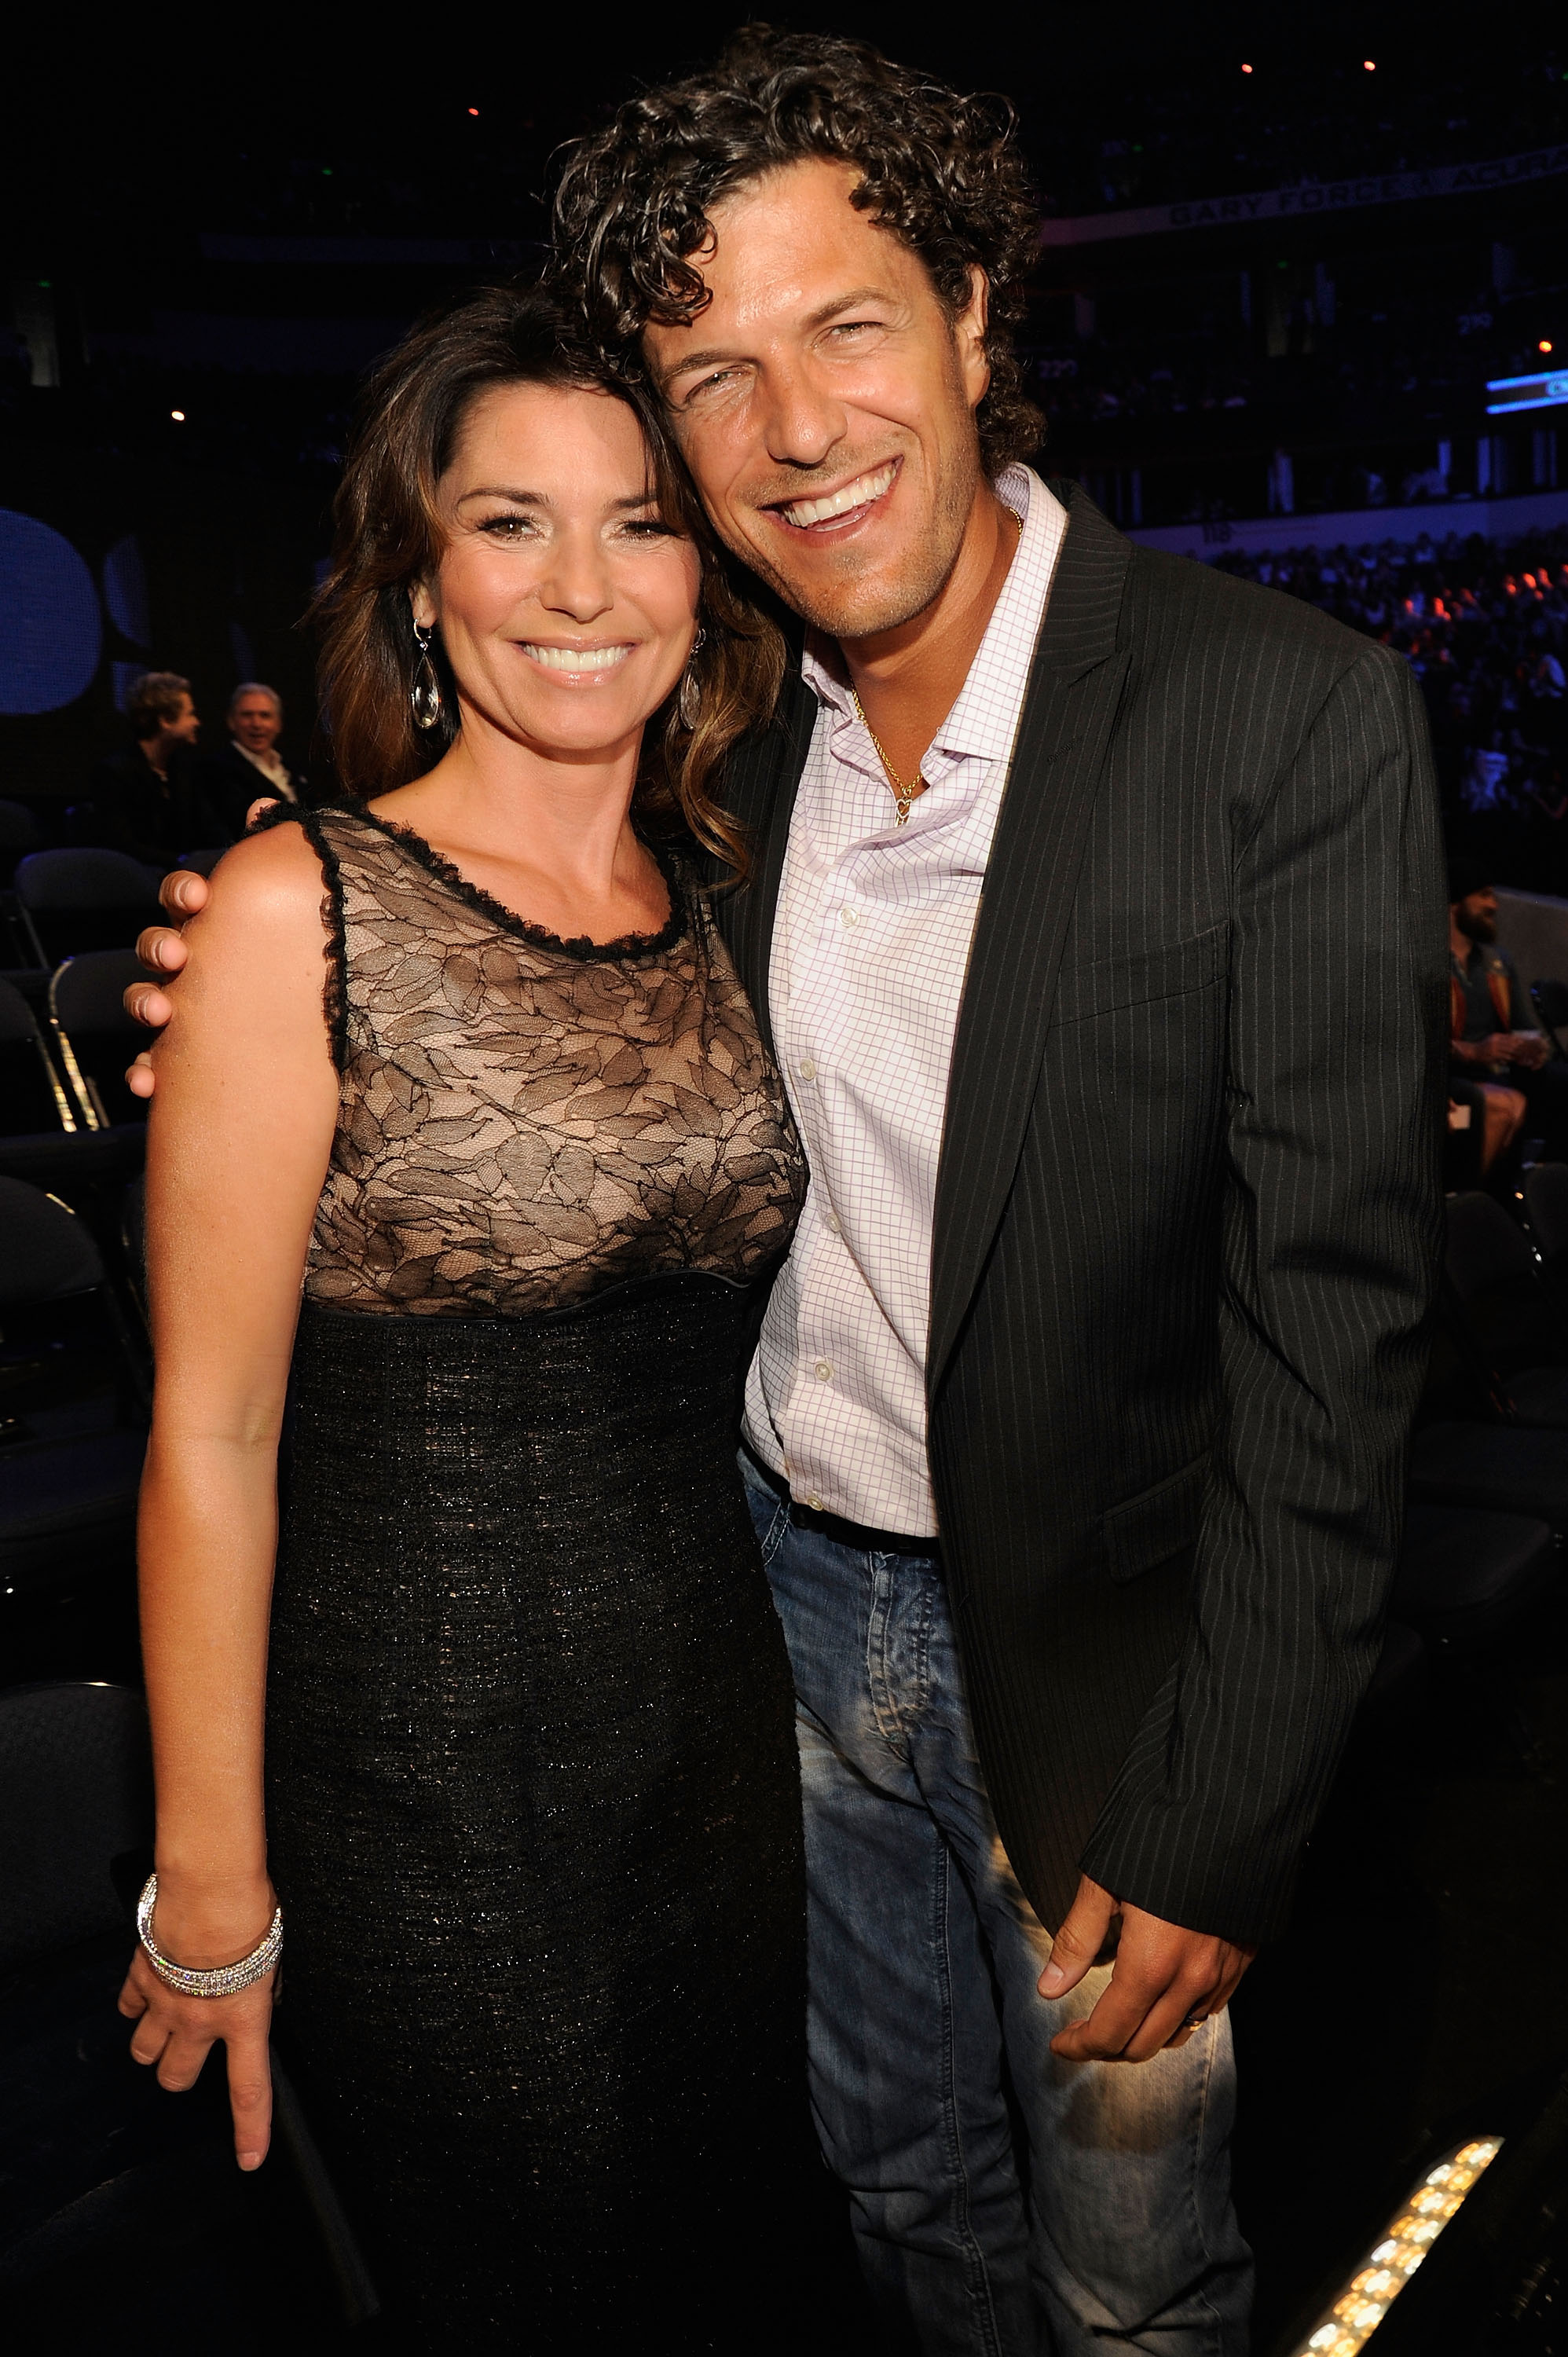 Shania Twain and triathlete Frederic Thiebaud in Nashville, Tennessee in 2011 | Source: Getty Images